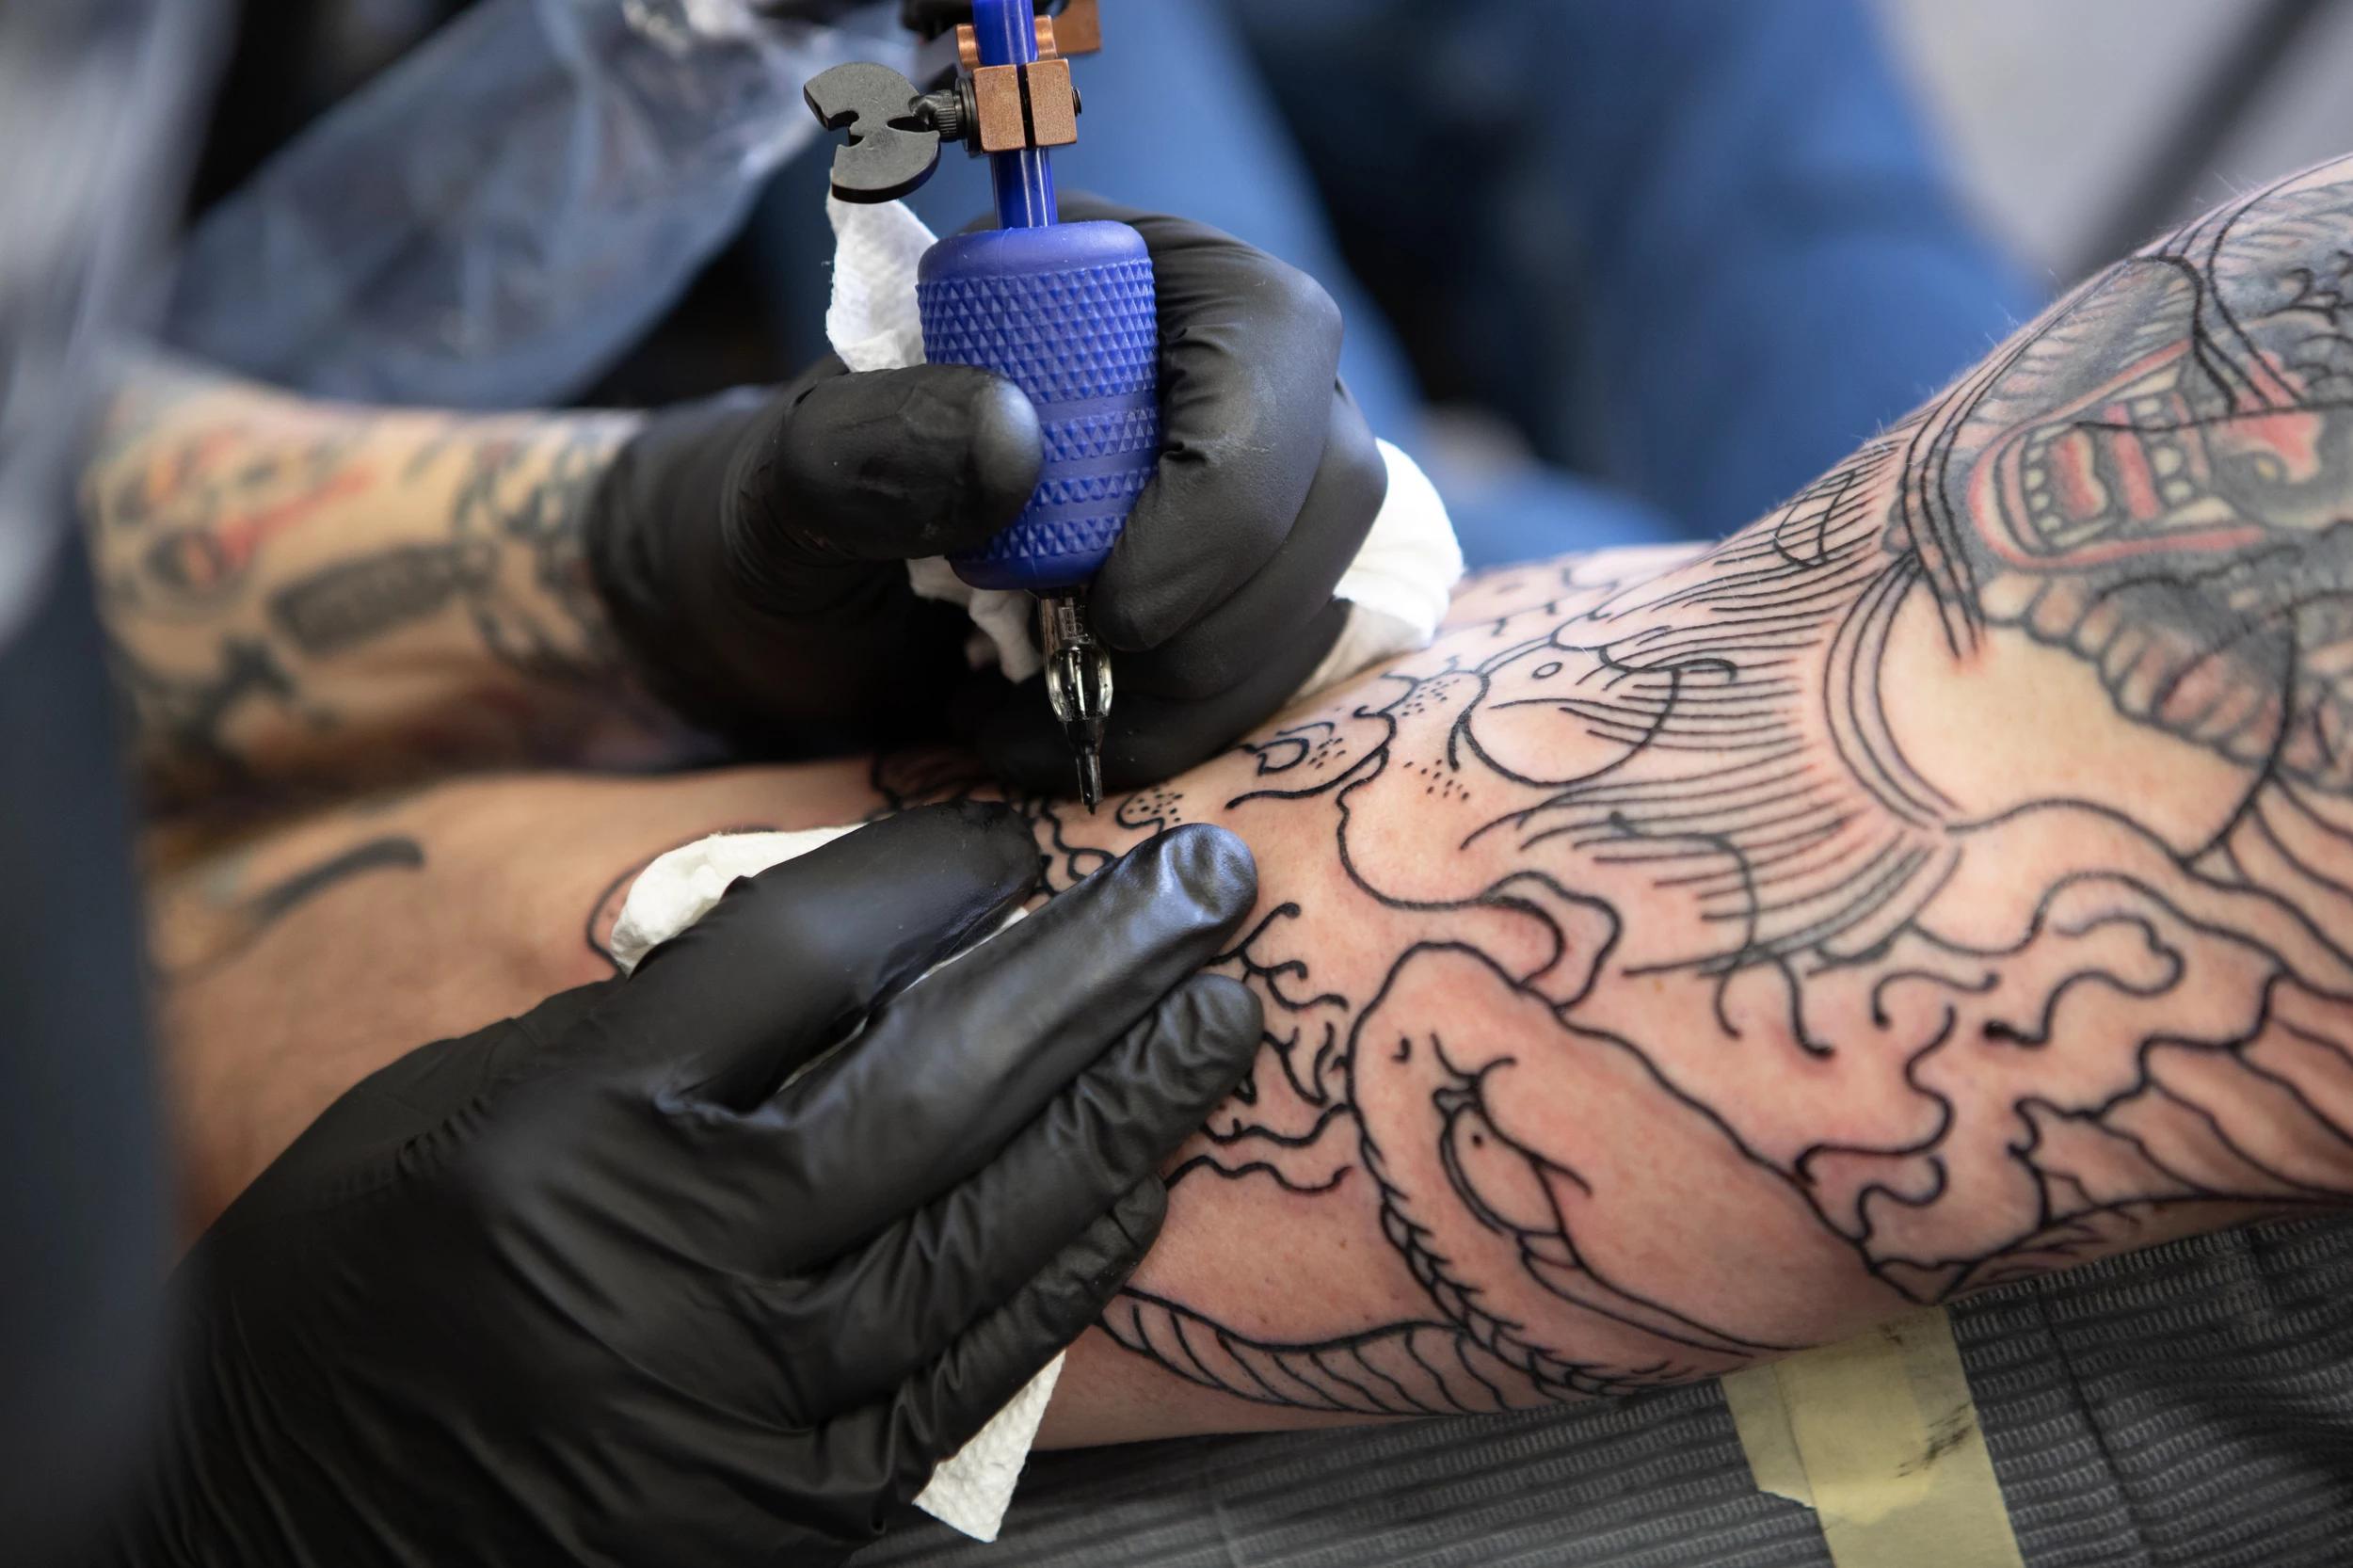 12th Annual West Texas Tattoo Convention coming to San Angelo